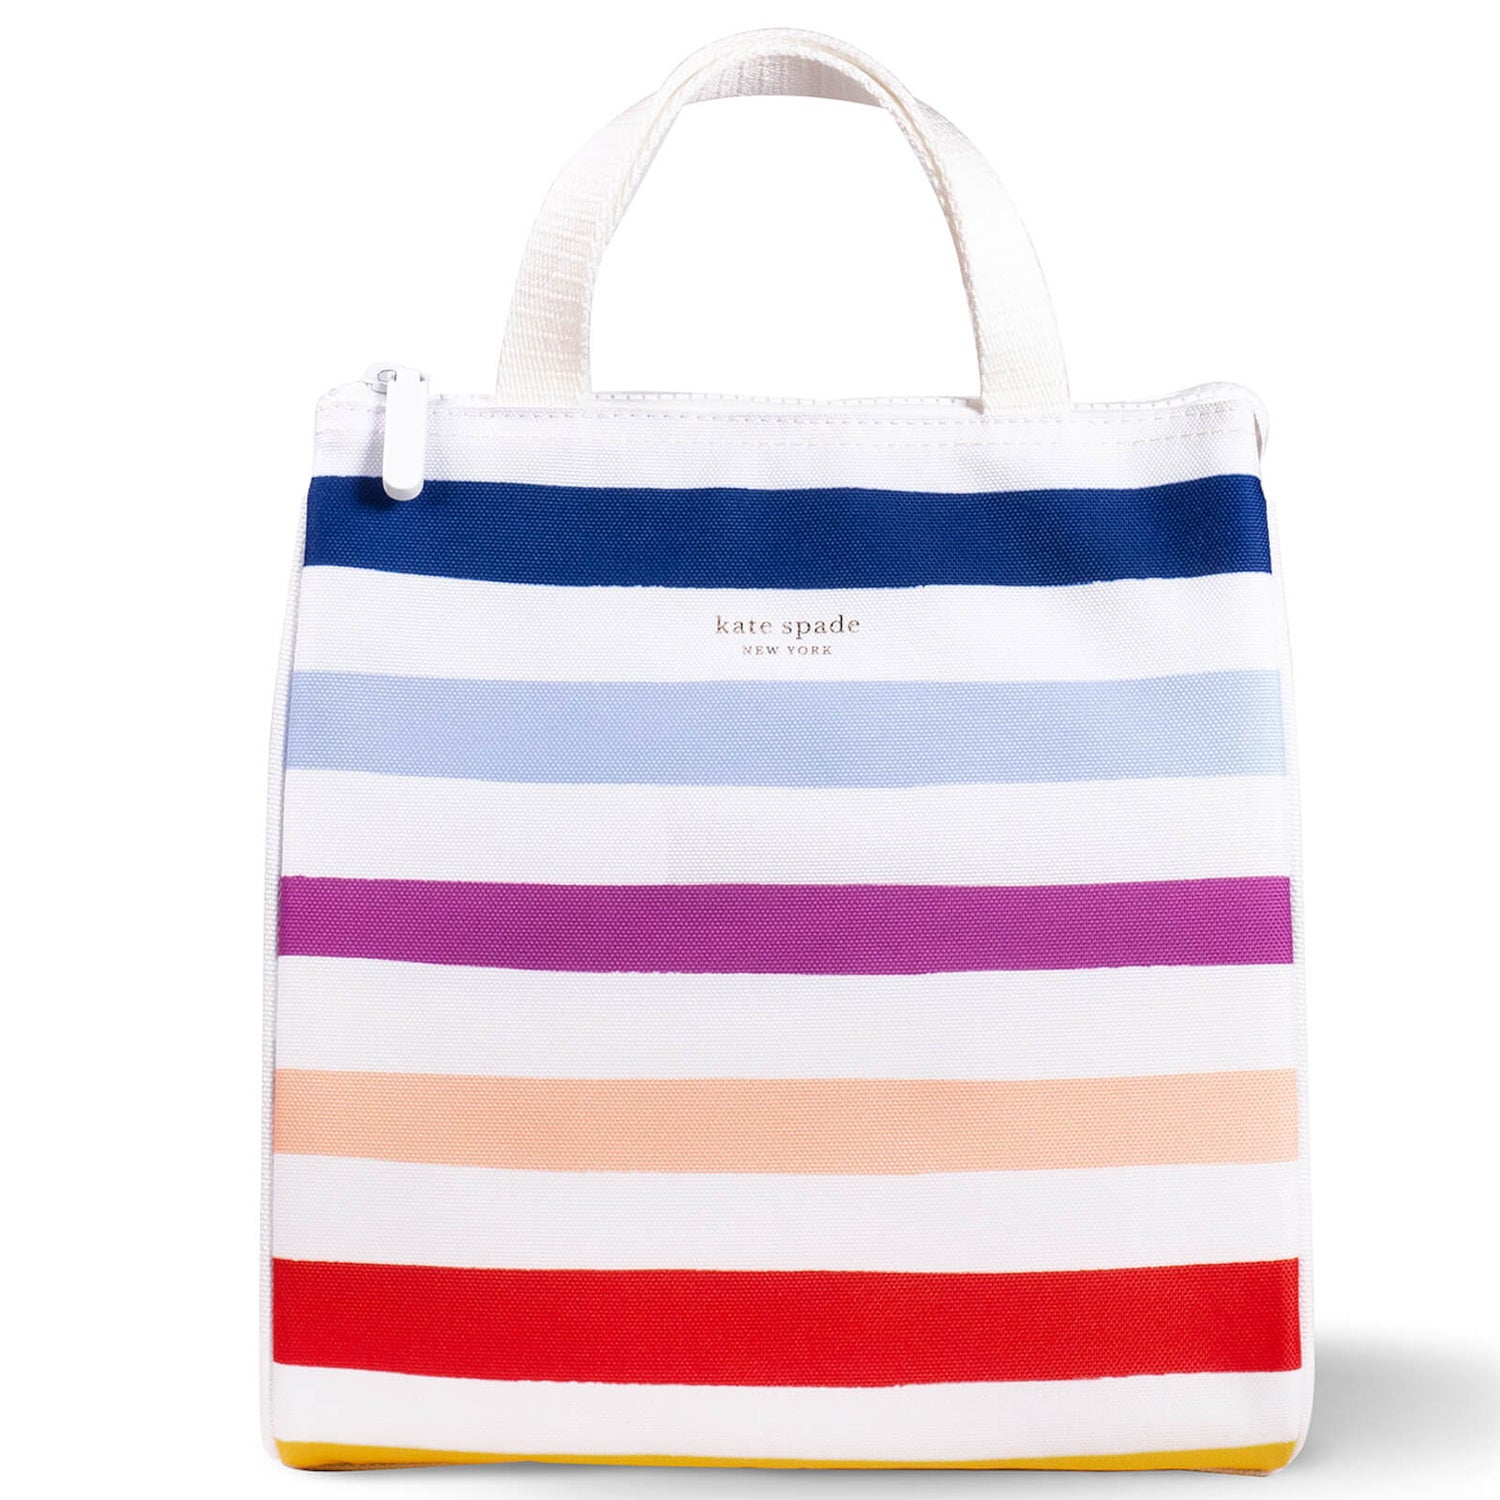 Kate Spade New York Lunch Bag - Candy Stripe